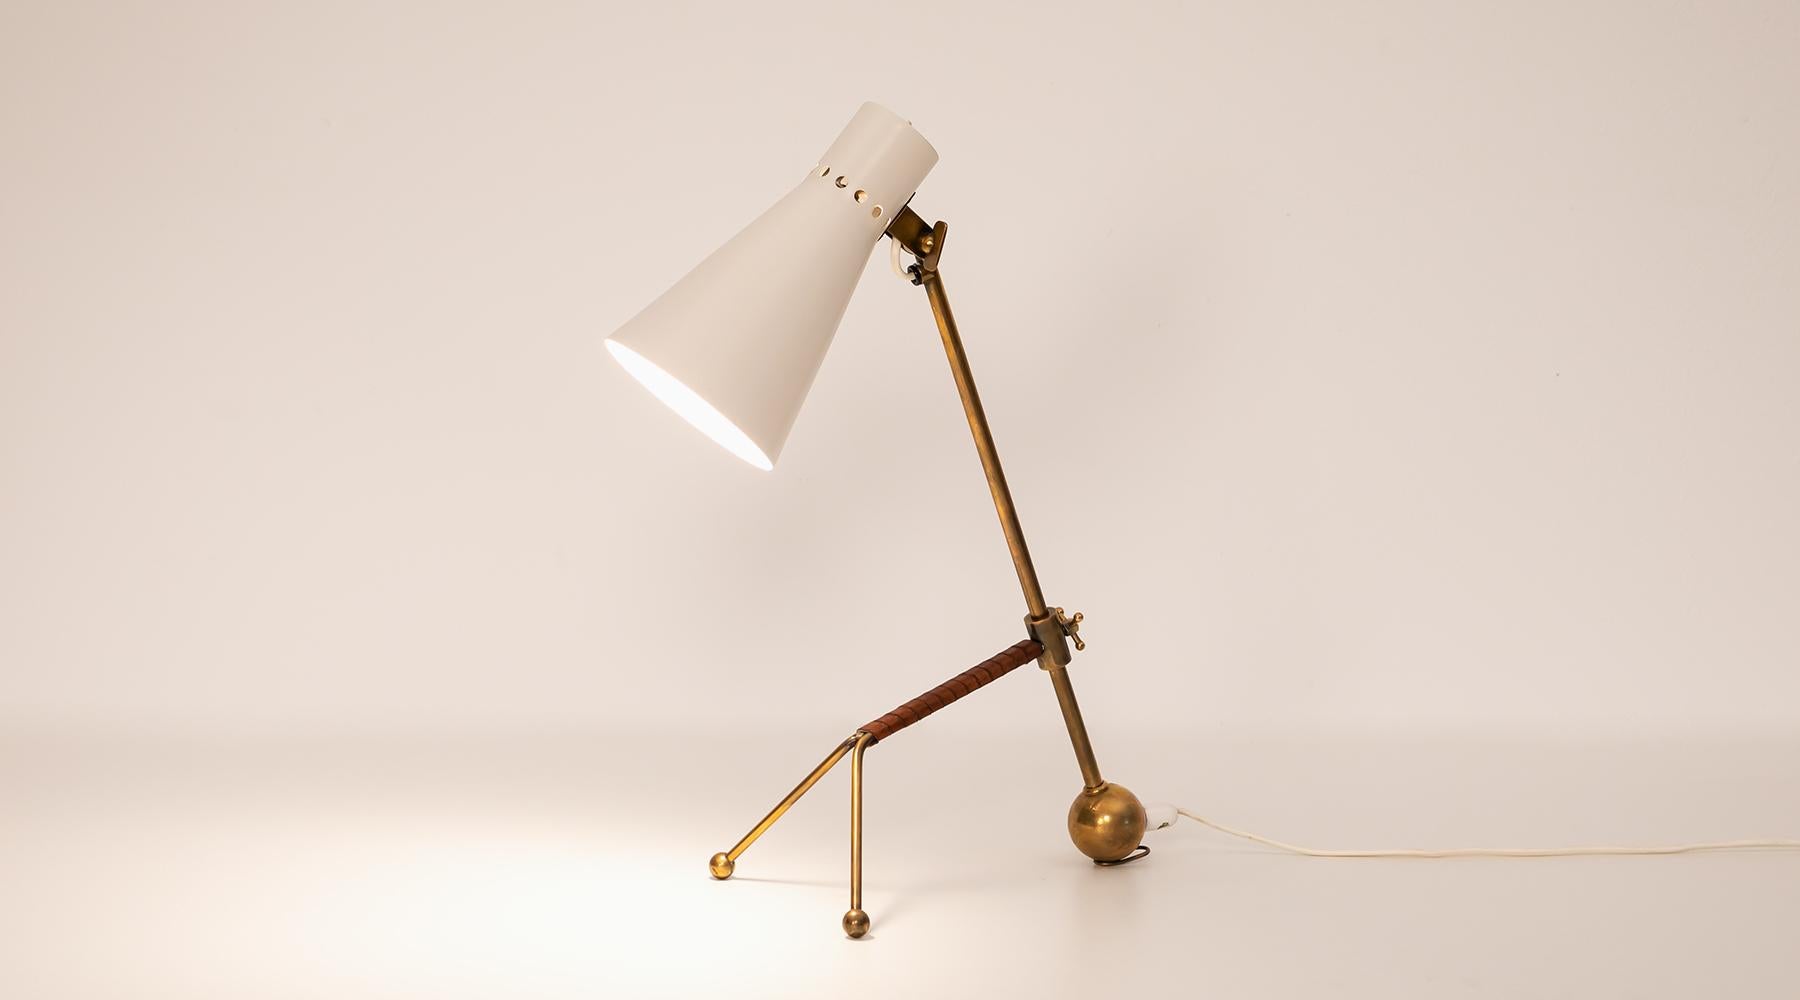 Table lamp, white metal shade and brass stem, Tapio Wirkkala, Finland, 1958.

Subtle table lamp in white lacquered metal shade and brass stem with details in leather by Tapio Wirkkala. The base and shade are adjustable in various positions. The